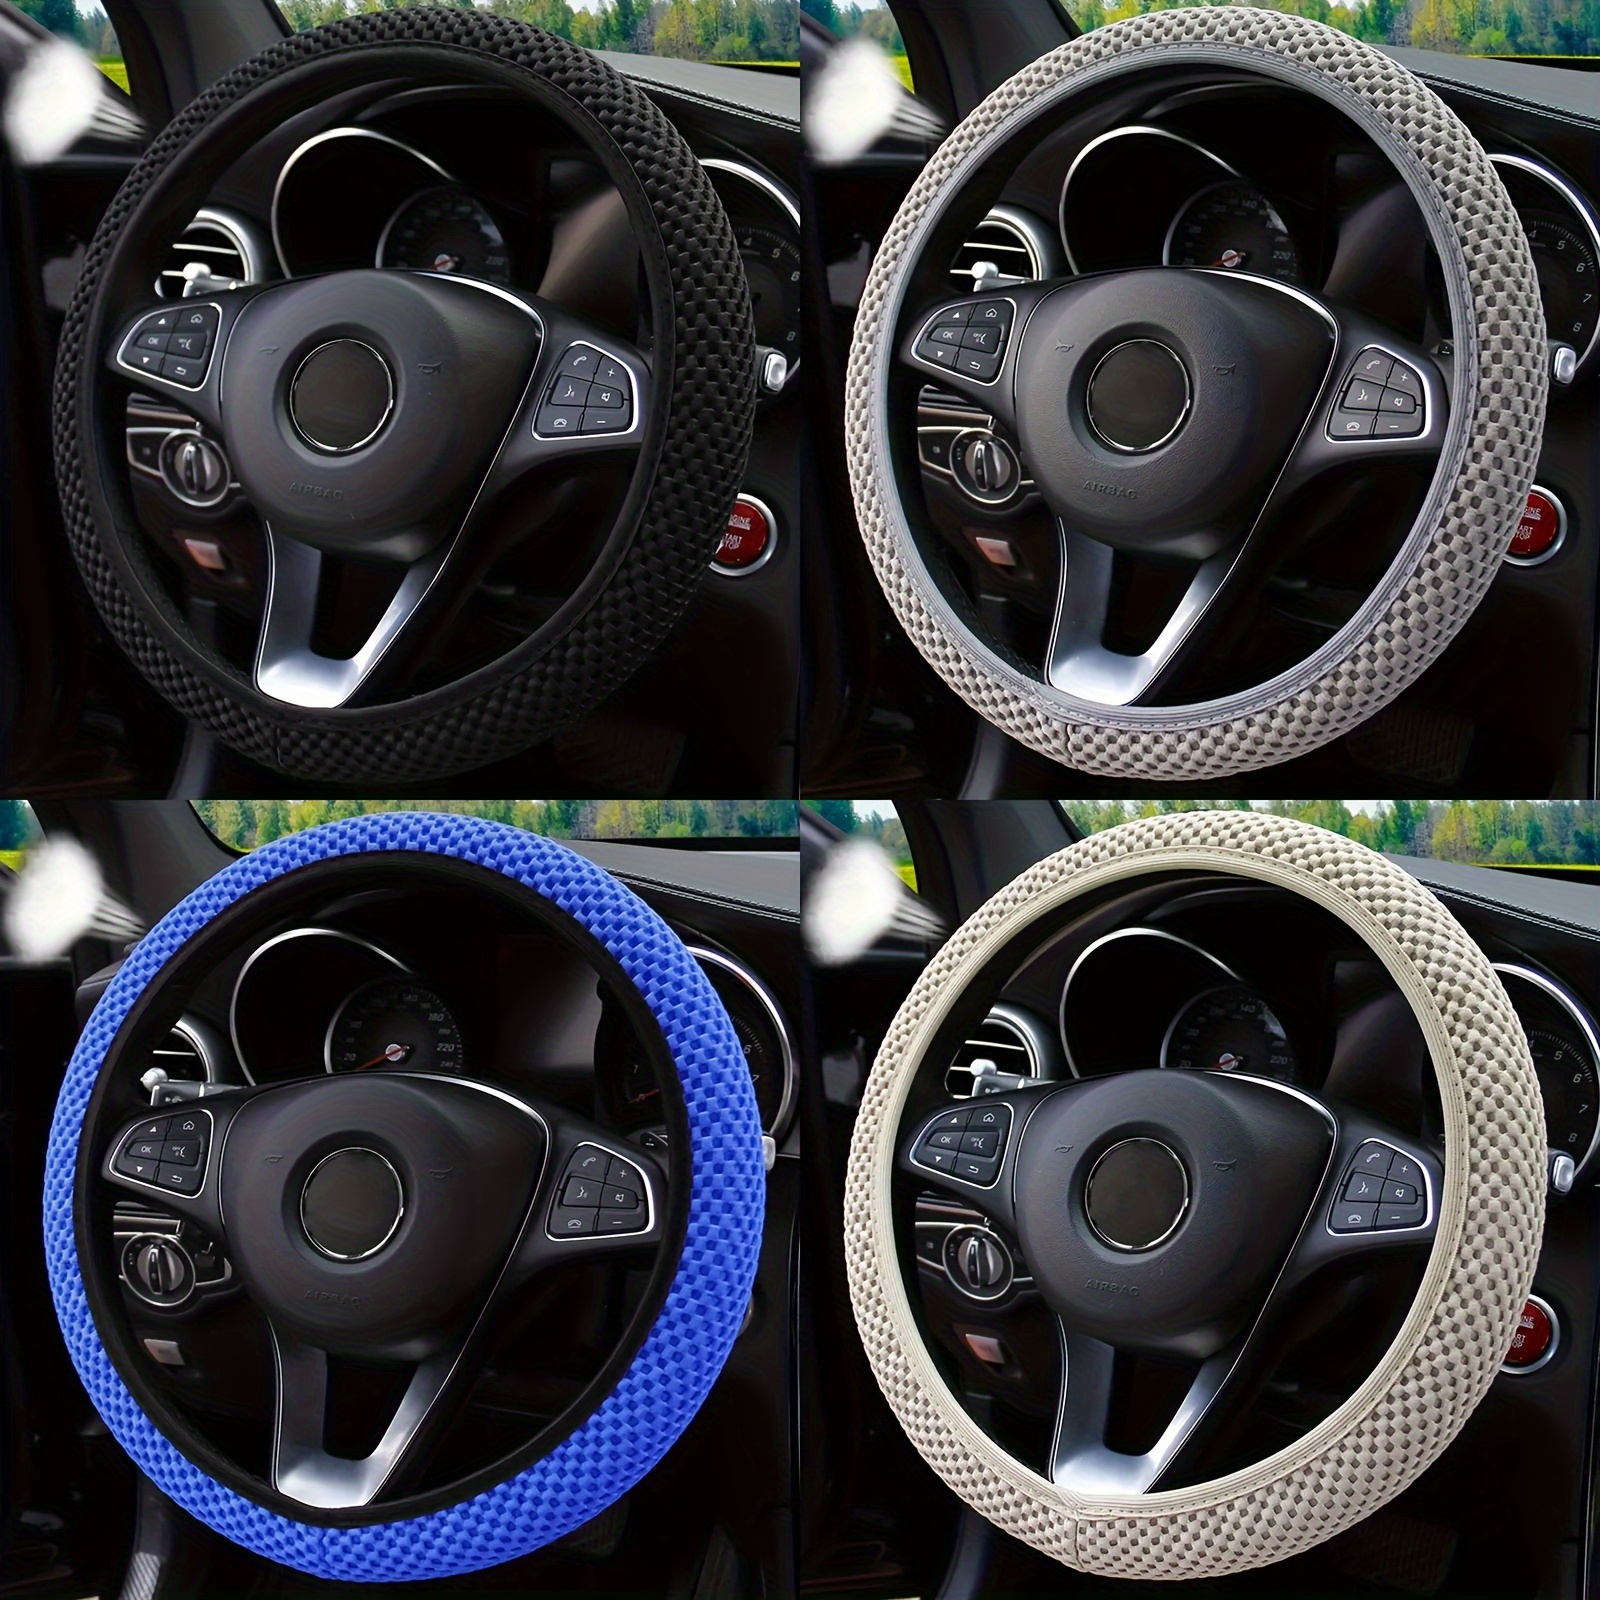 

Breathable 3d Mesh Steering Wheel Cover - Sweat-absorbent, Non-slip, Comfort Fit For 14.57-14.96" Wheels, No Inner Ring Required